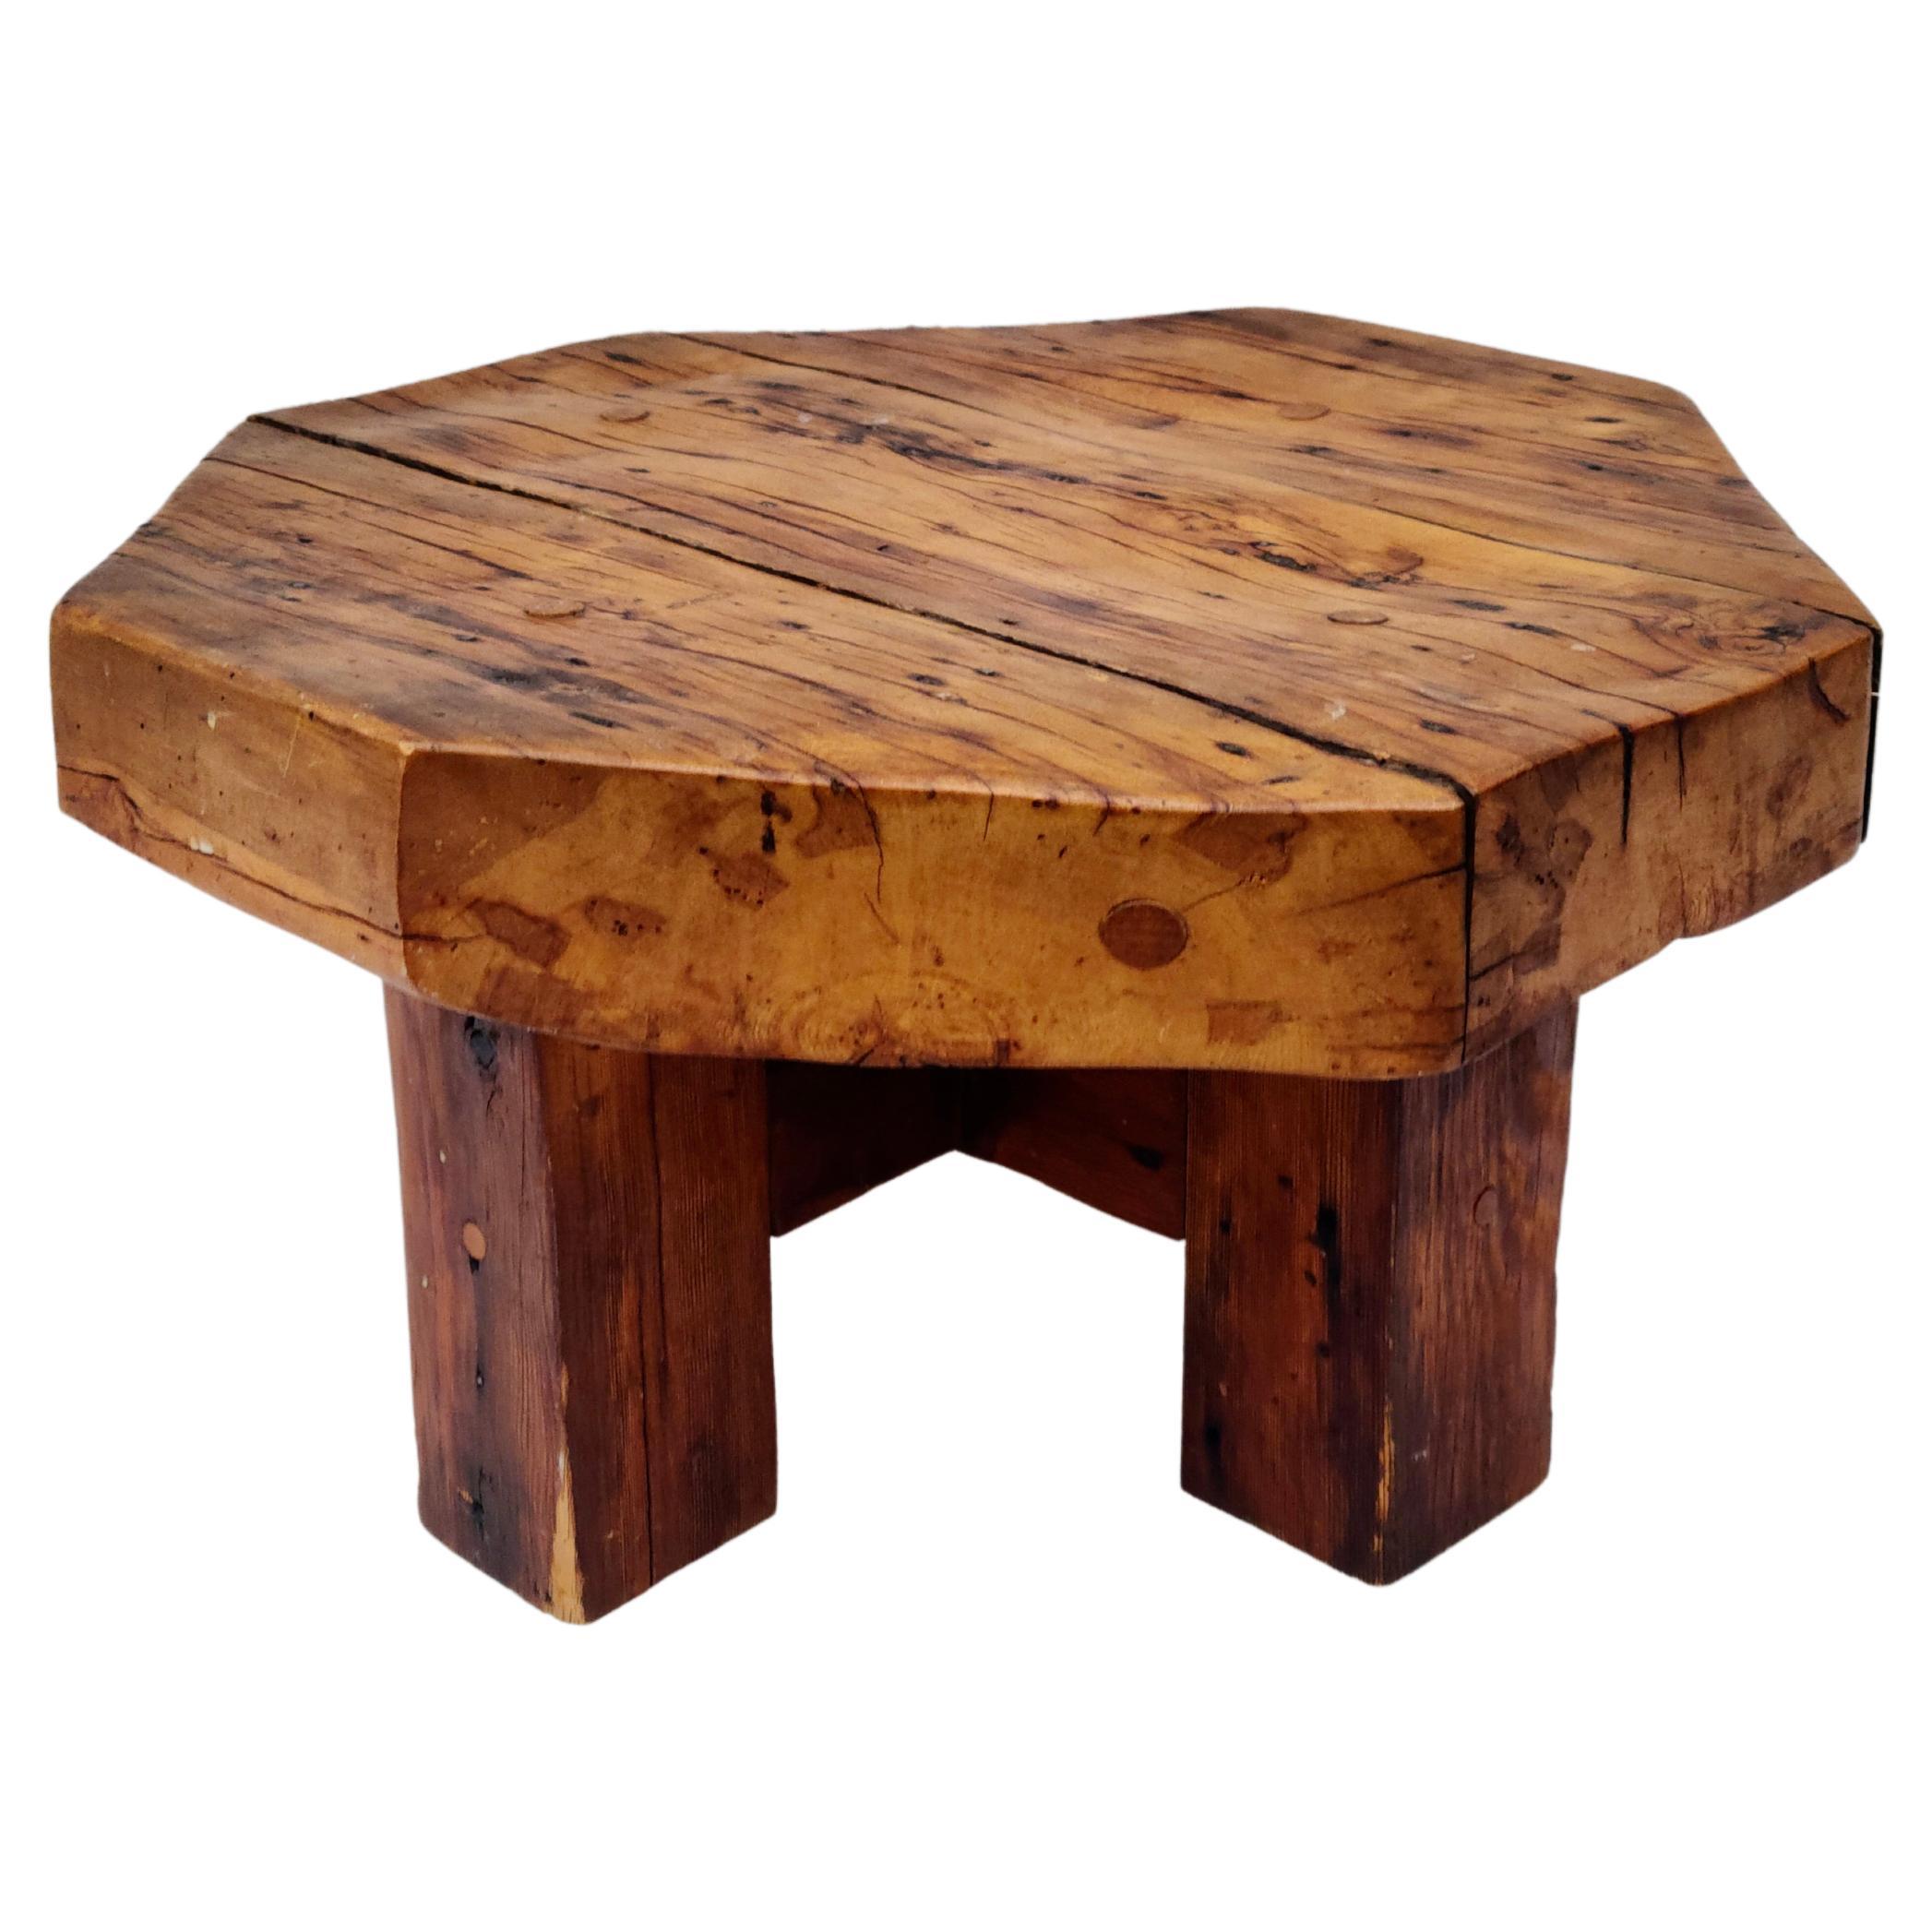 Please feel free to reach out for accurate shipping to your location.

Studio craft coffee table.
Appears to be spalted applewood top on fir base.
Signed by craftsman Tom Williams.
